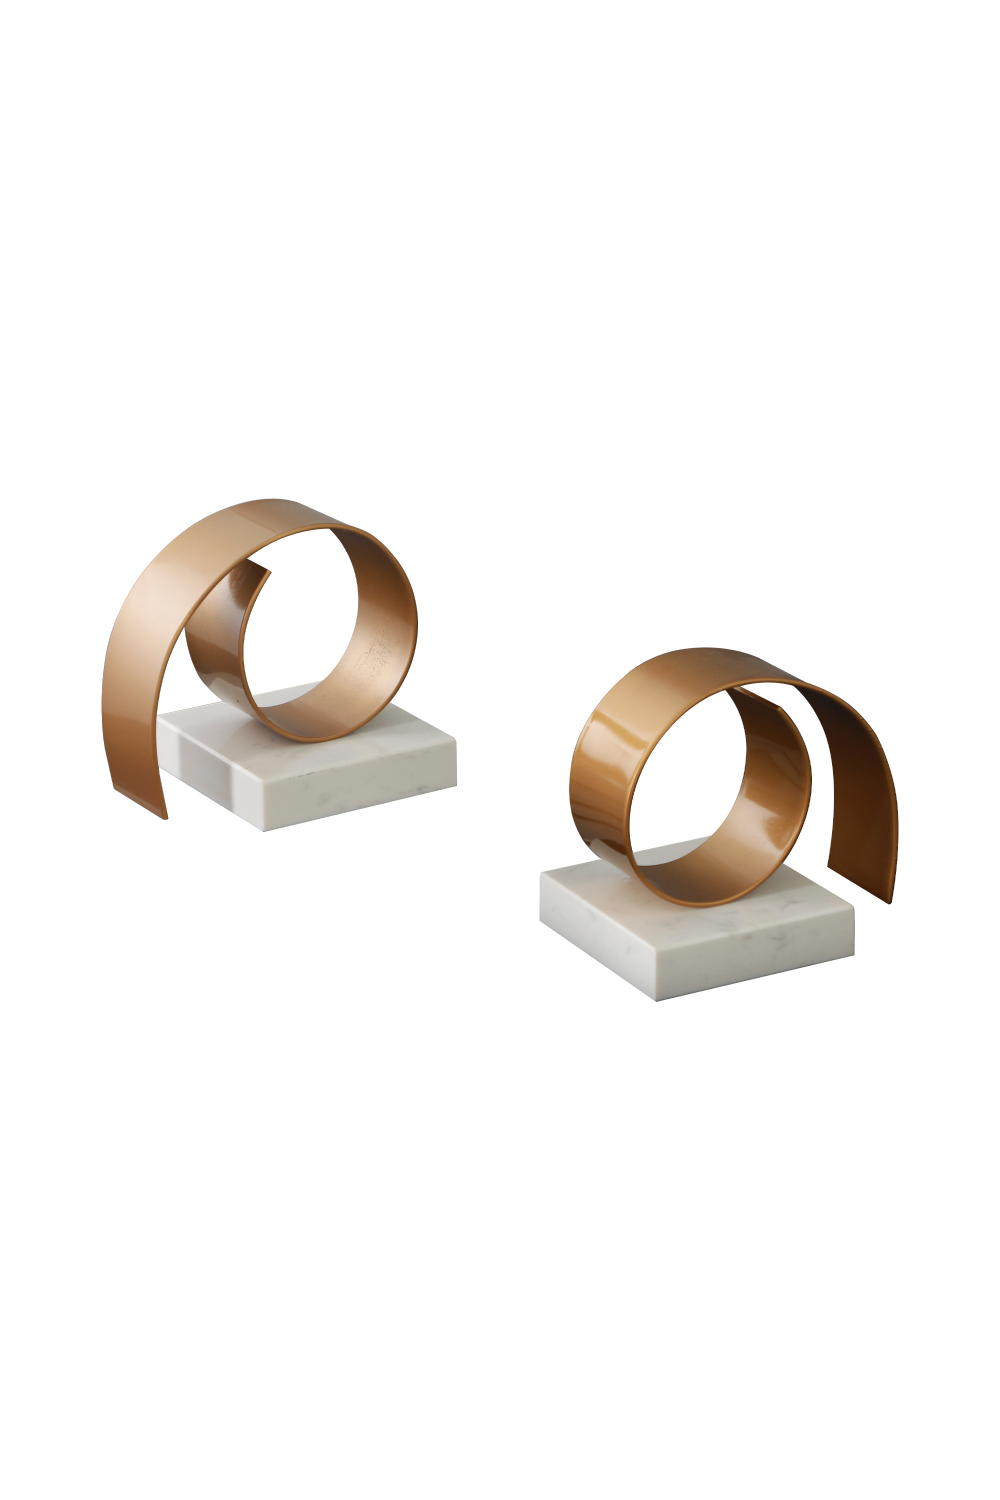 White Marble Gold Modern Sculpture Bookend | Liang & Eimil Swirl | Oroa.com